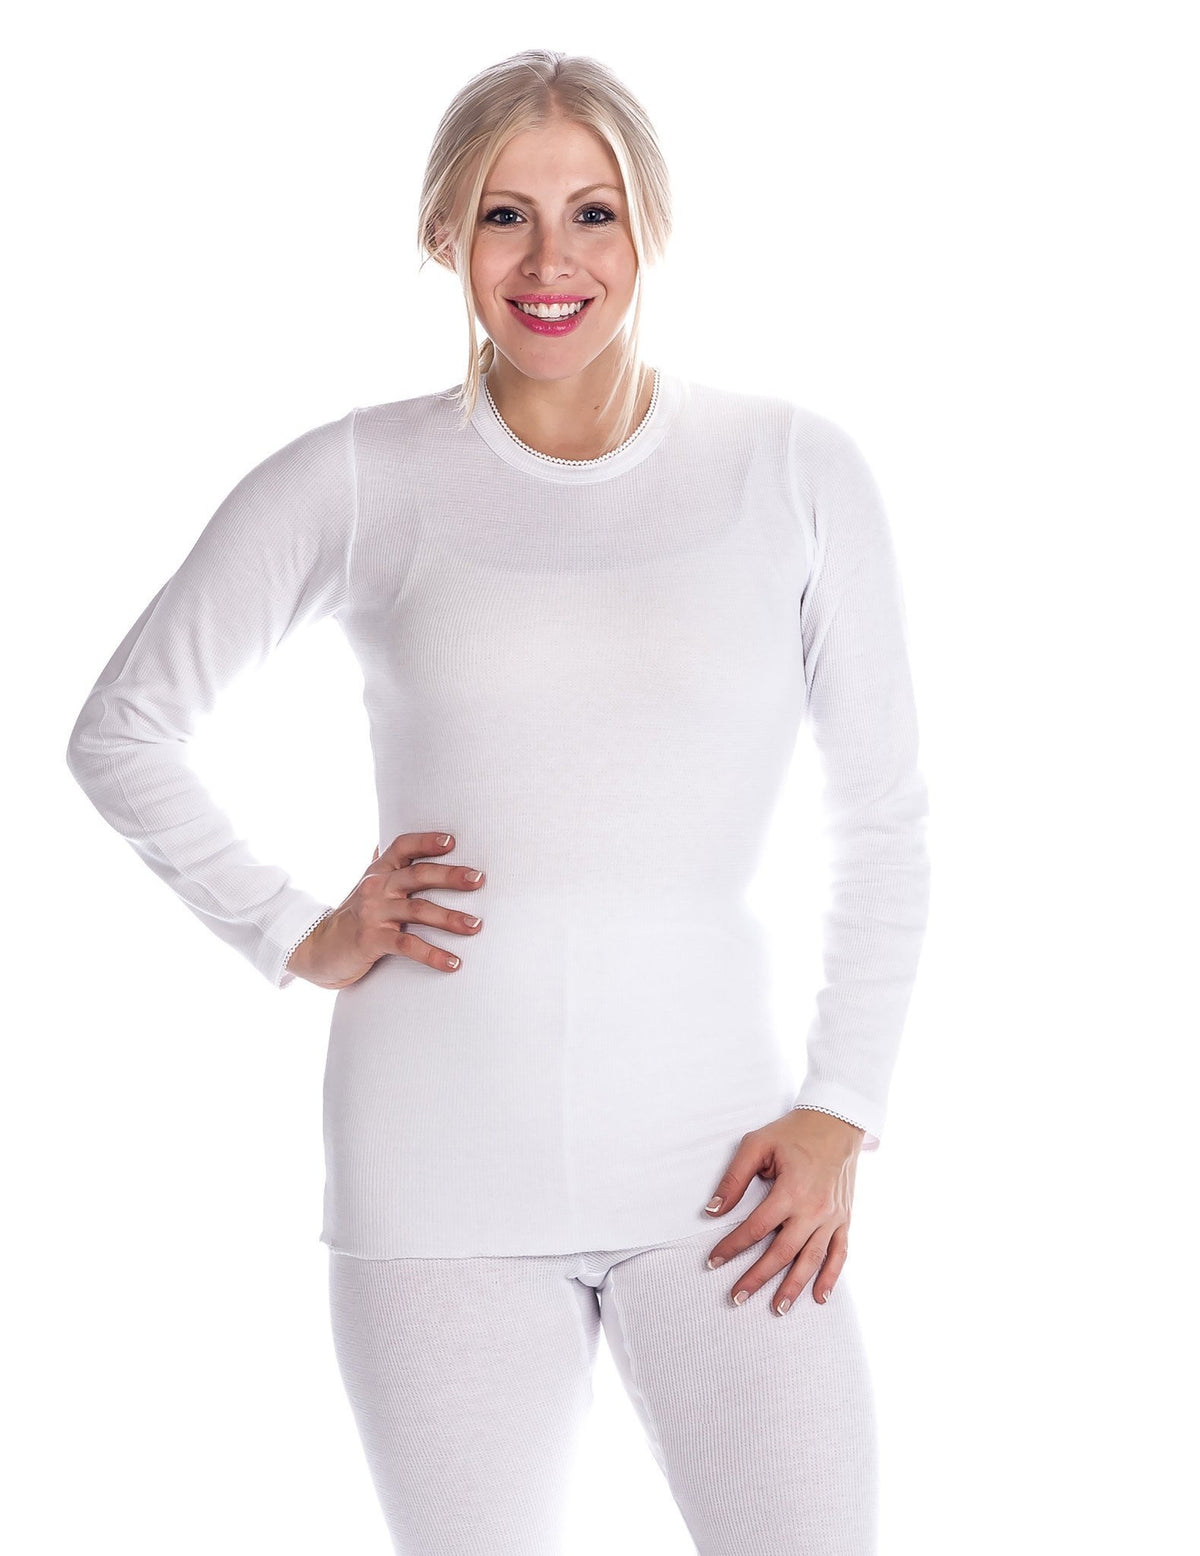 Women's Extreme Cold Waffle Knit Thermal Crew Top - White